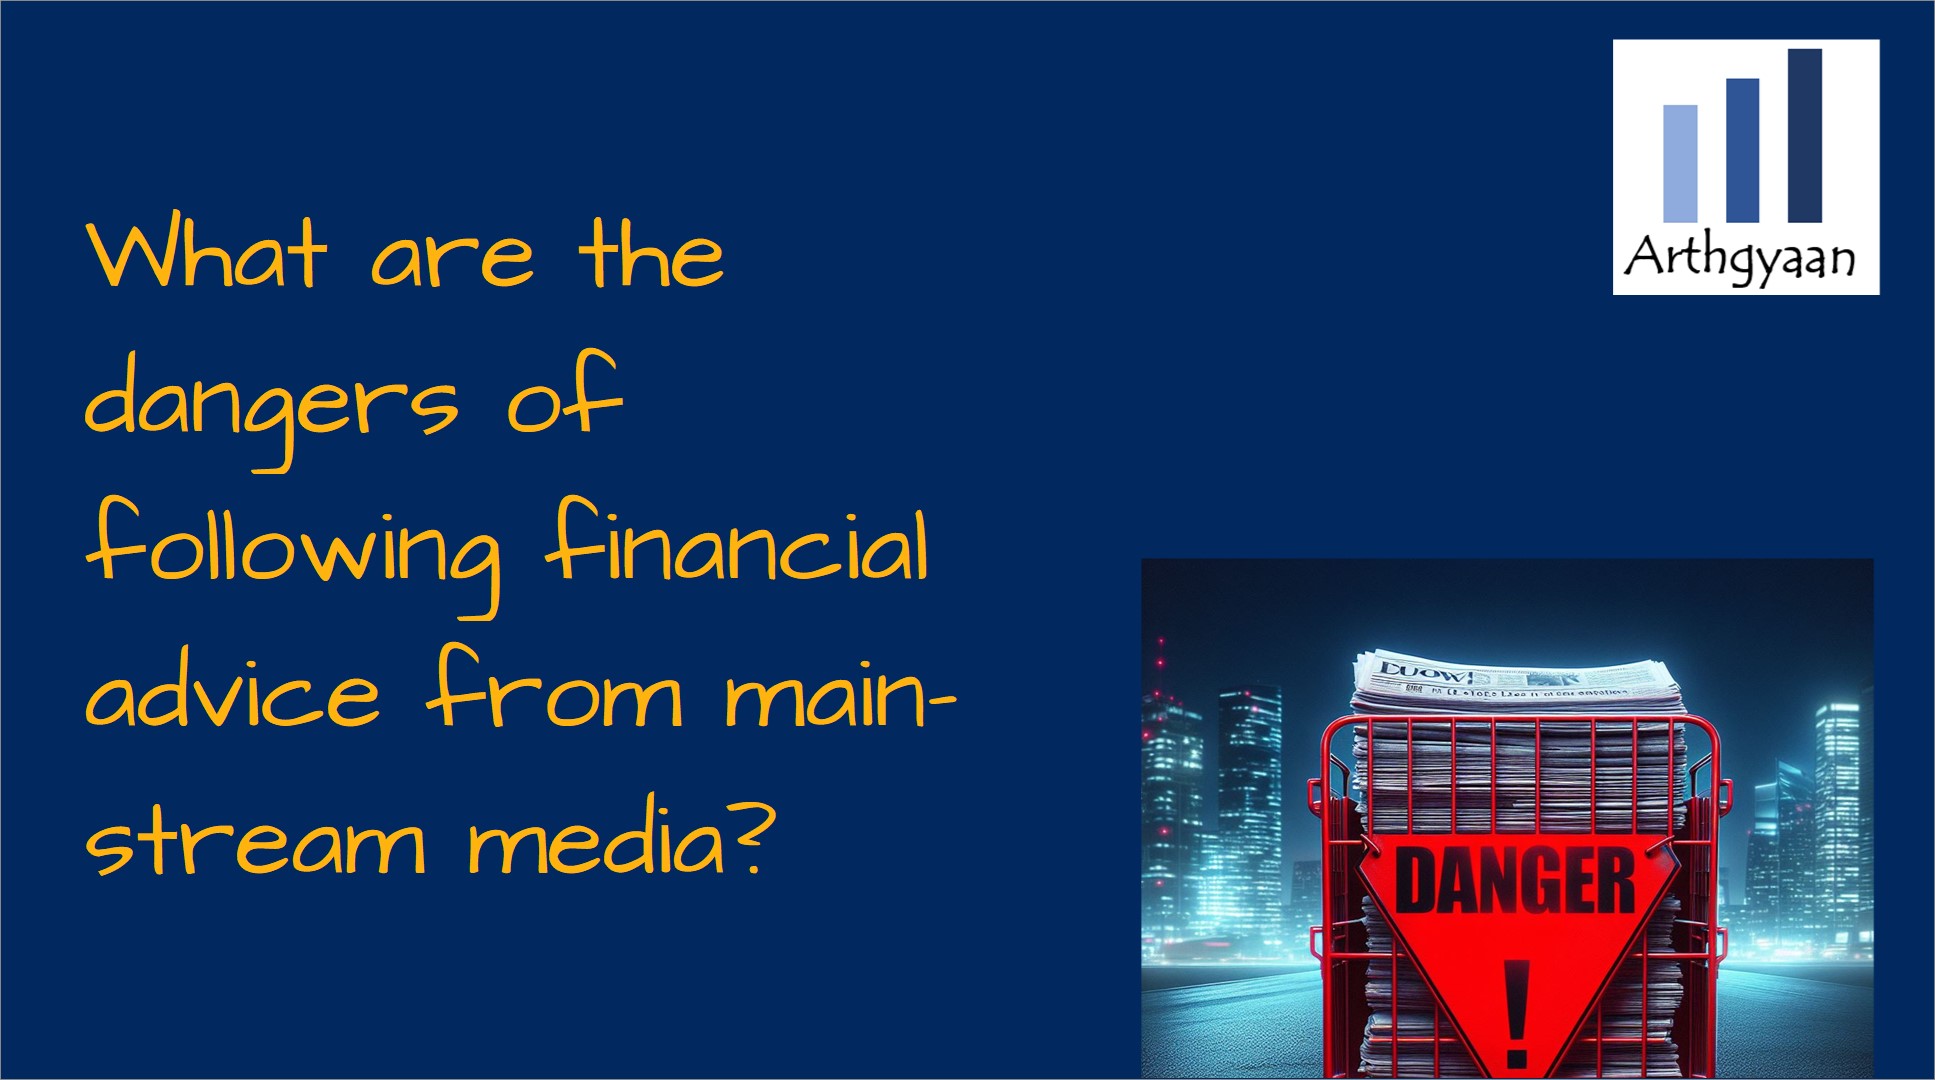 What are the dangers of following financial advice from main-stream media?